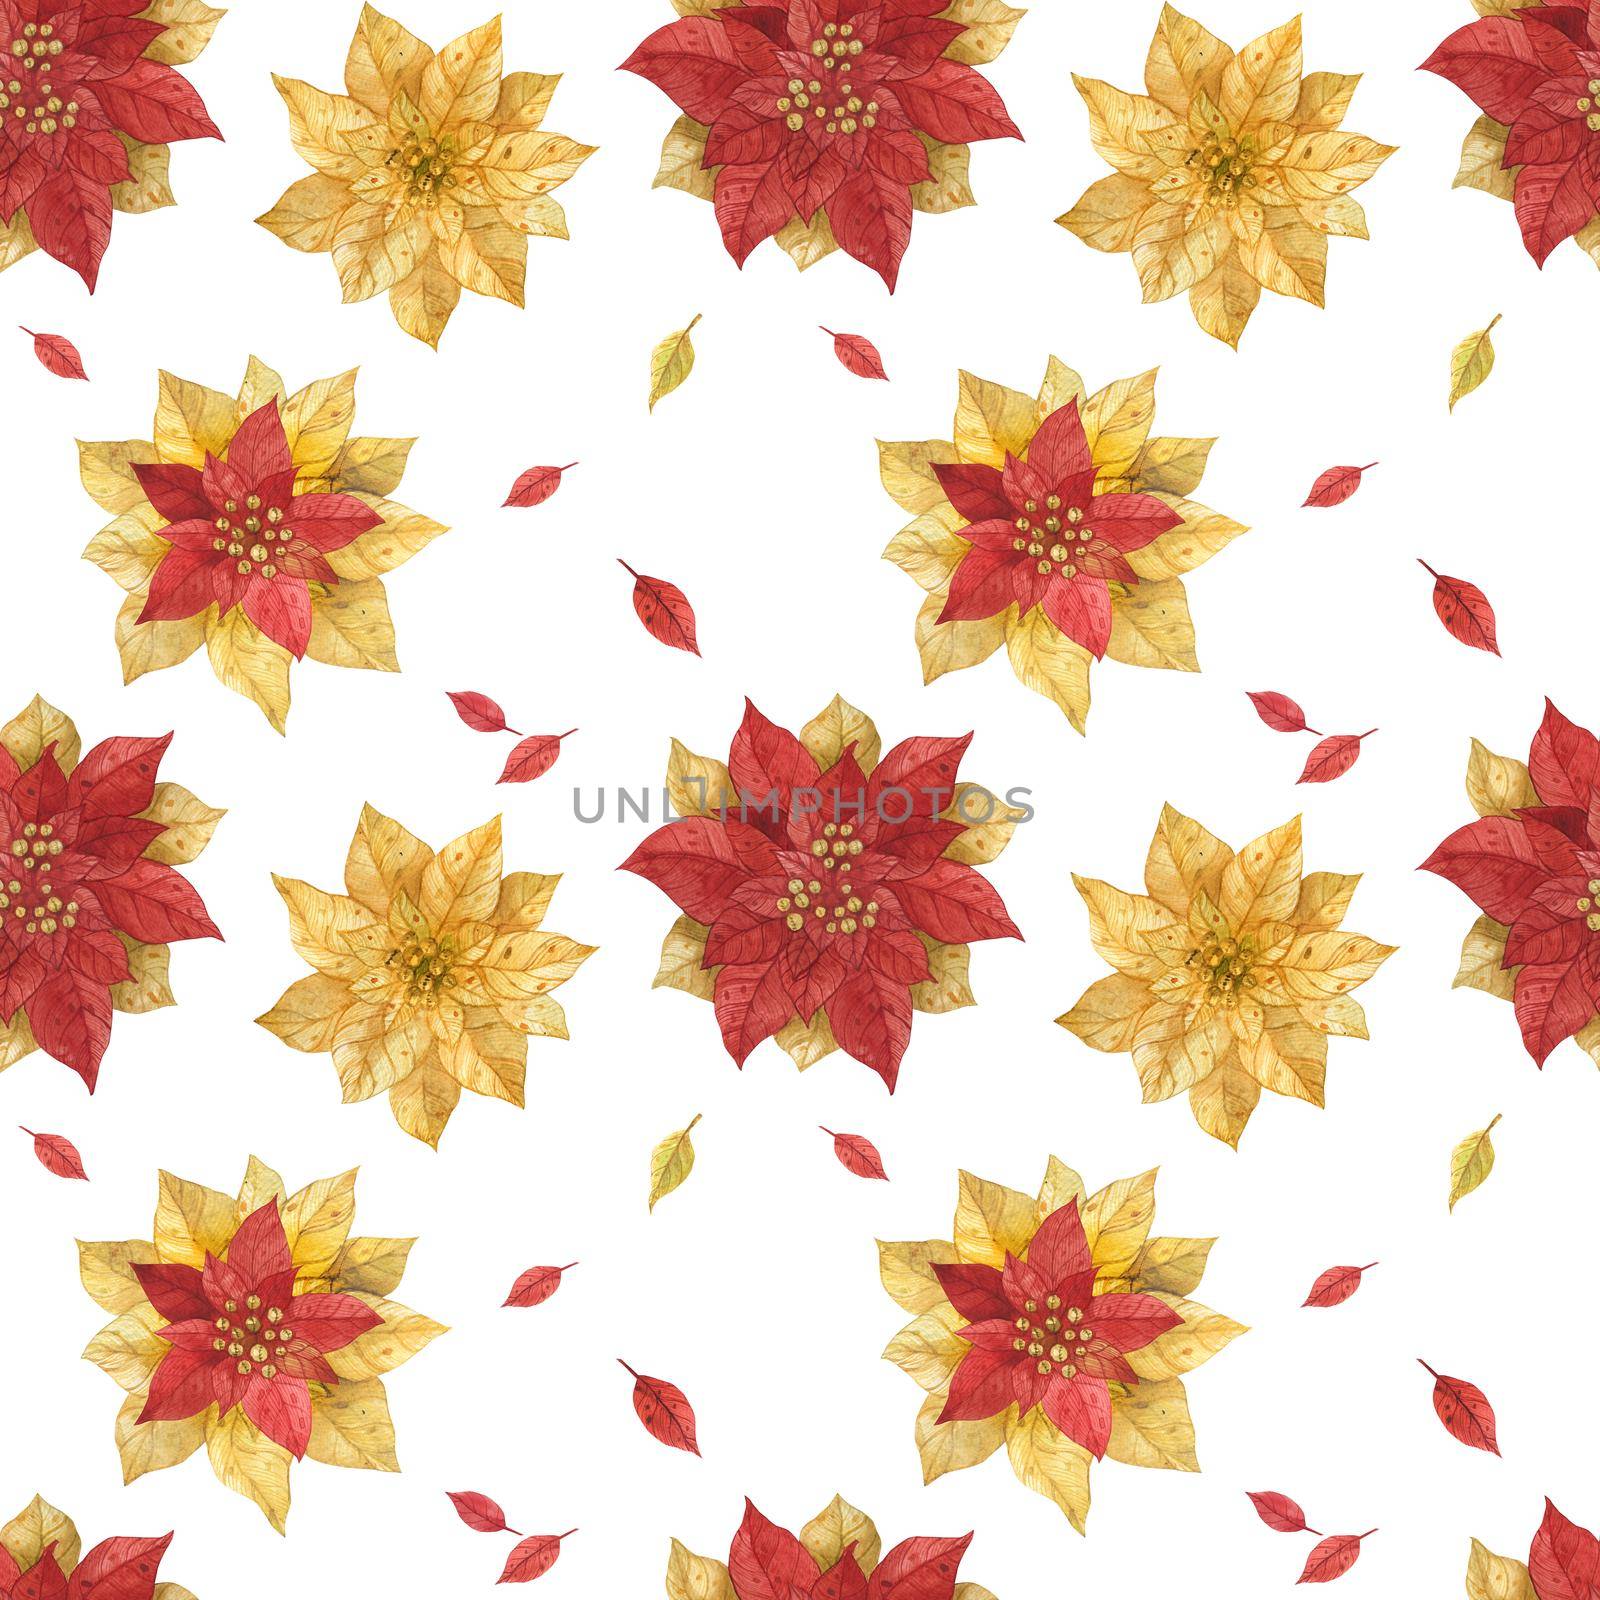 Christmas Red Gold Poinsettia seamless pattern by Xeniasnowstorm